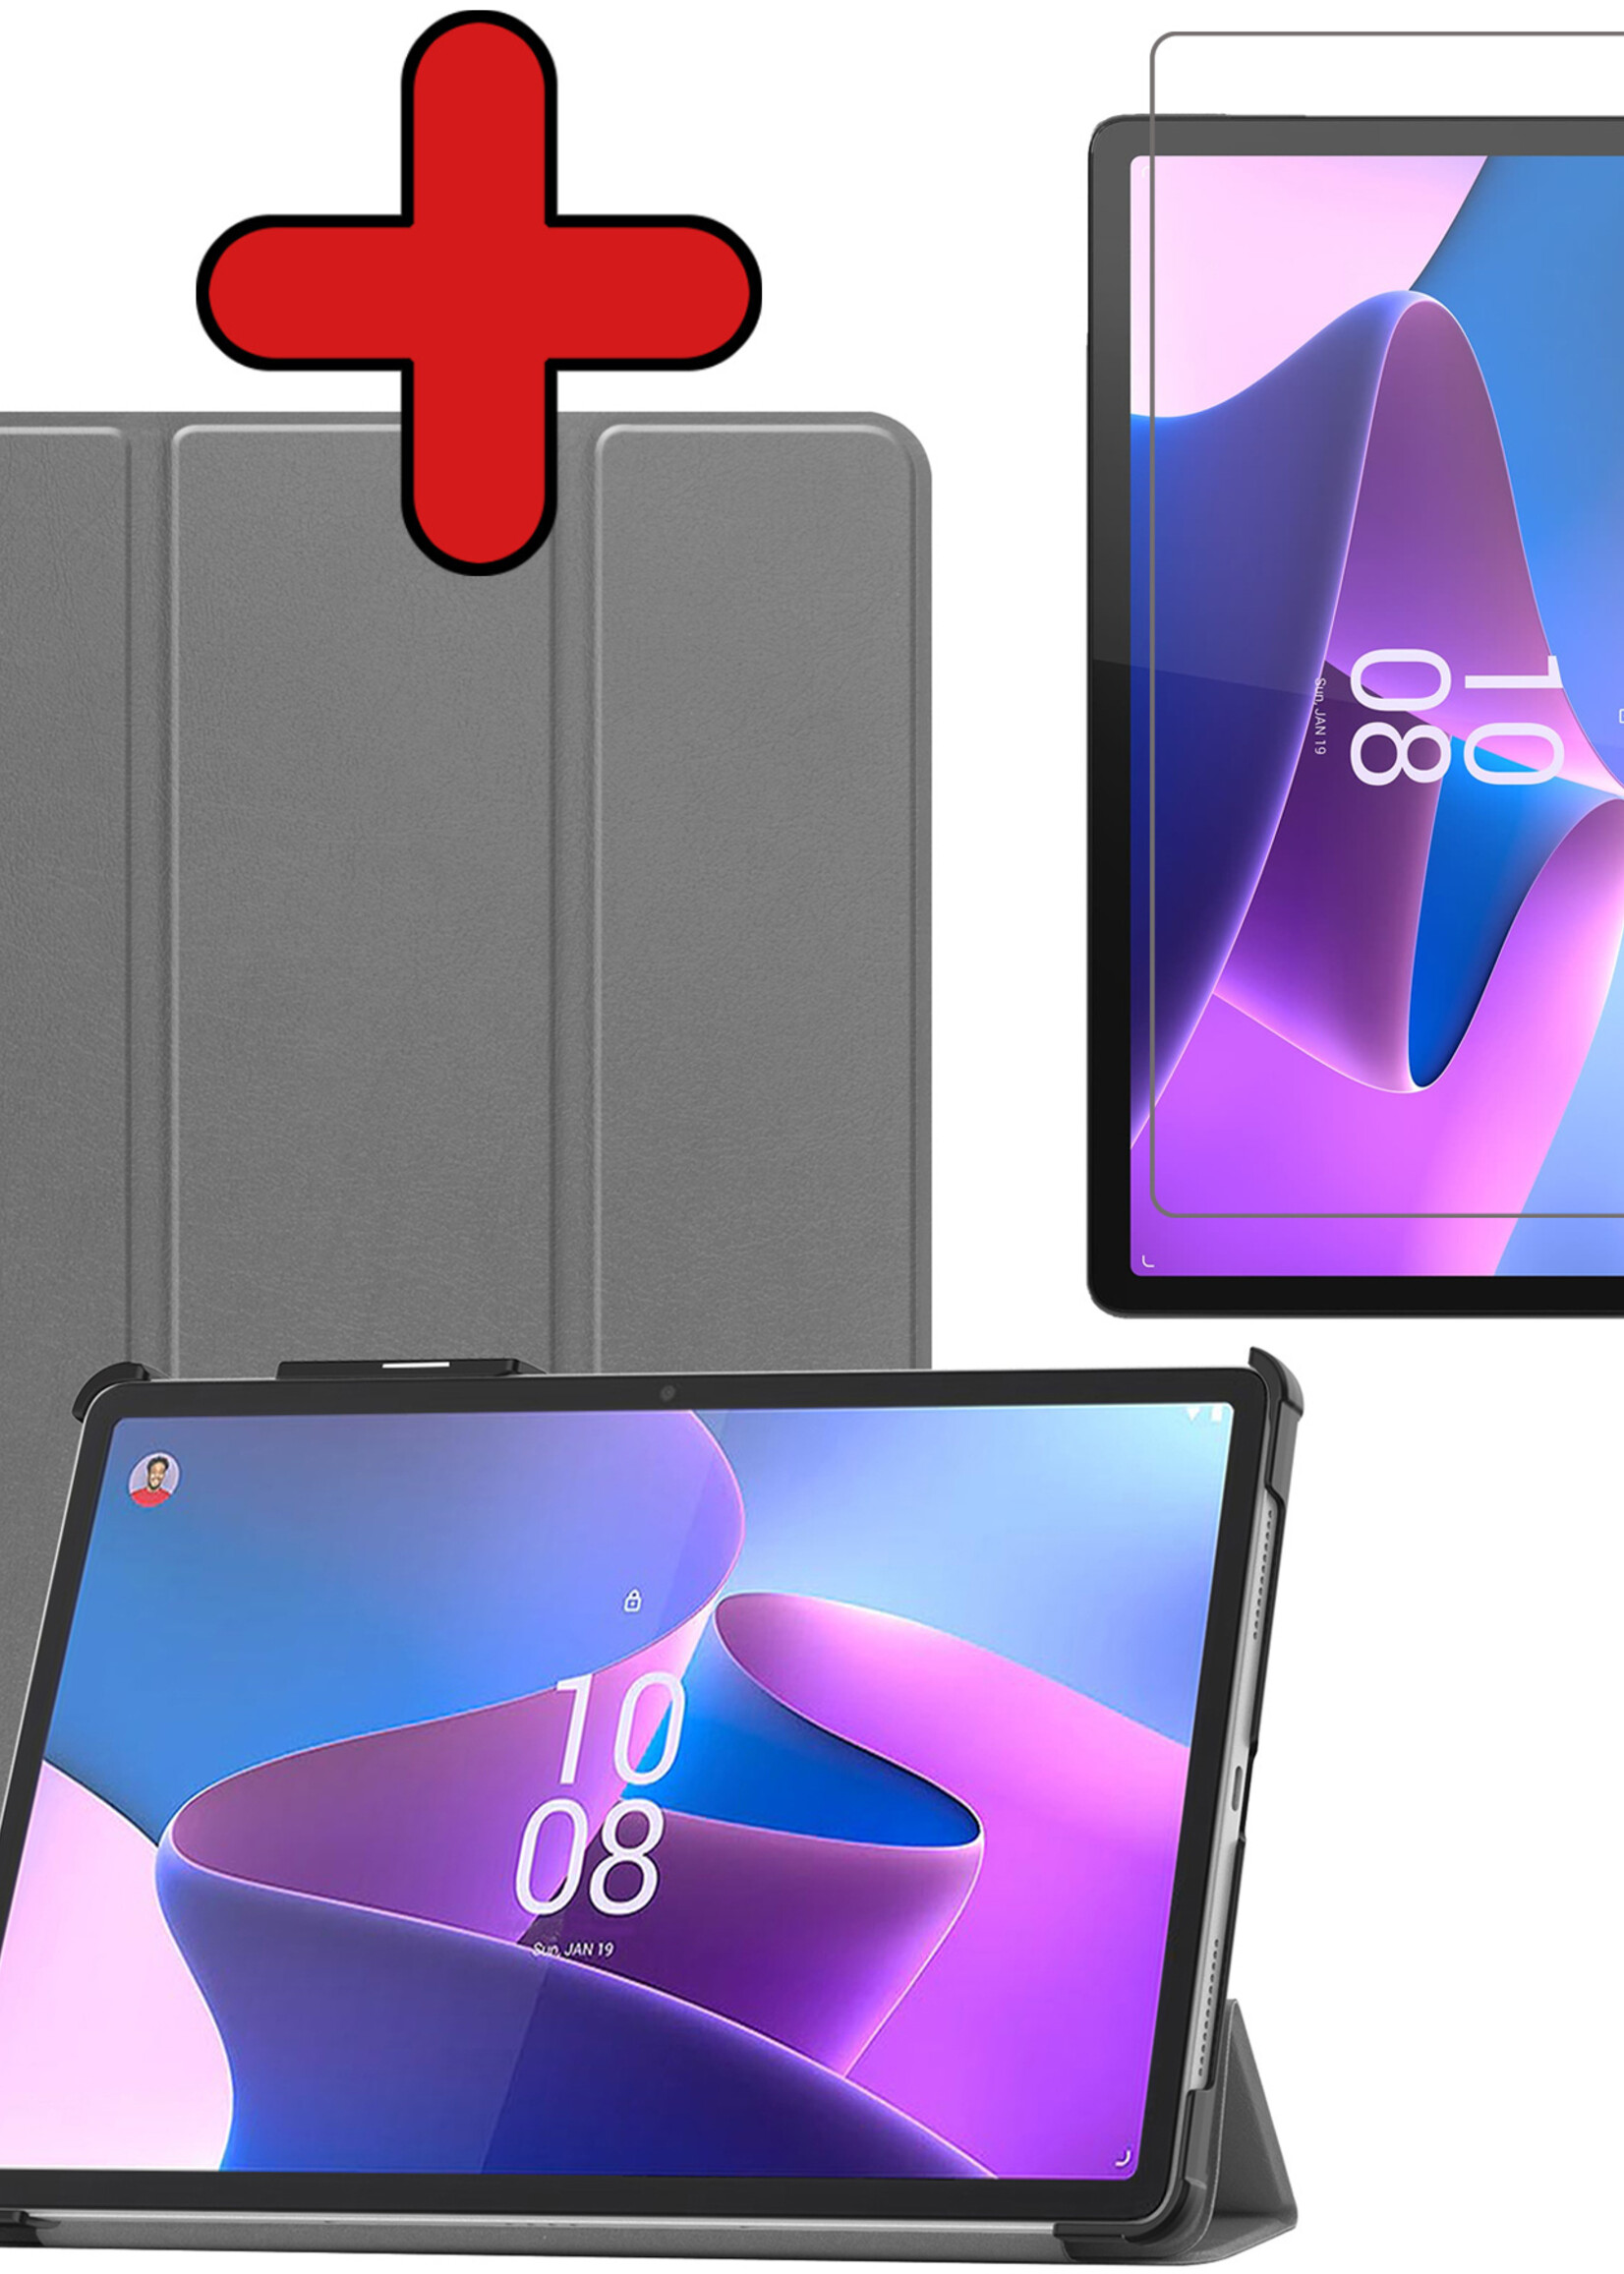 BTH Hoes Geschikt voor Lenovo Tab P11 Pro Hoes Book Case Hoesje Trifold Cover Met Uitsparing Geschikt voor Lenovo Pen Met Screenprotector - Hoesje Geschikt voor Lenovo Tab P11 Pro Hoesje Bookcase - Grijs